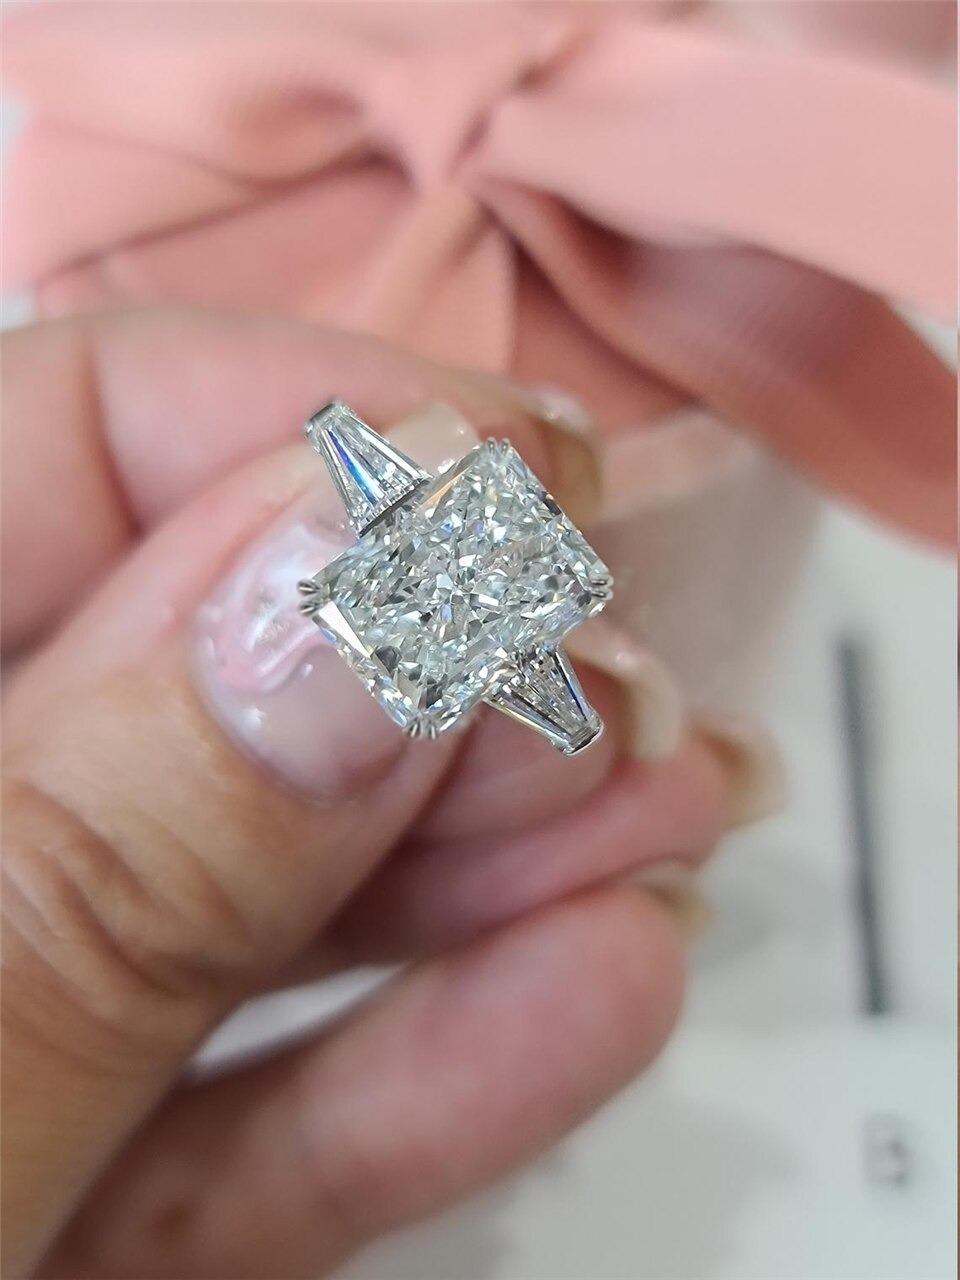 The diamond is very well cut and displays excellent luster! It is impeccably finished as well with Excellent grade in  Polish and very good Symmetry. The fantastic sparkle and bright play of light truly sets this diamond apart! This stone was hand